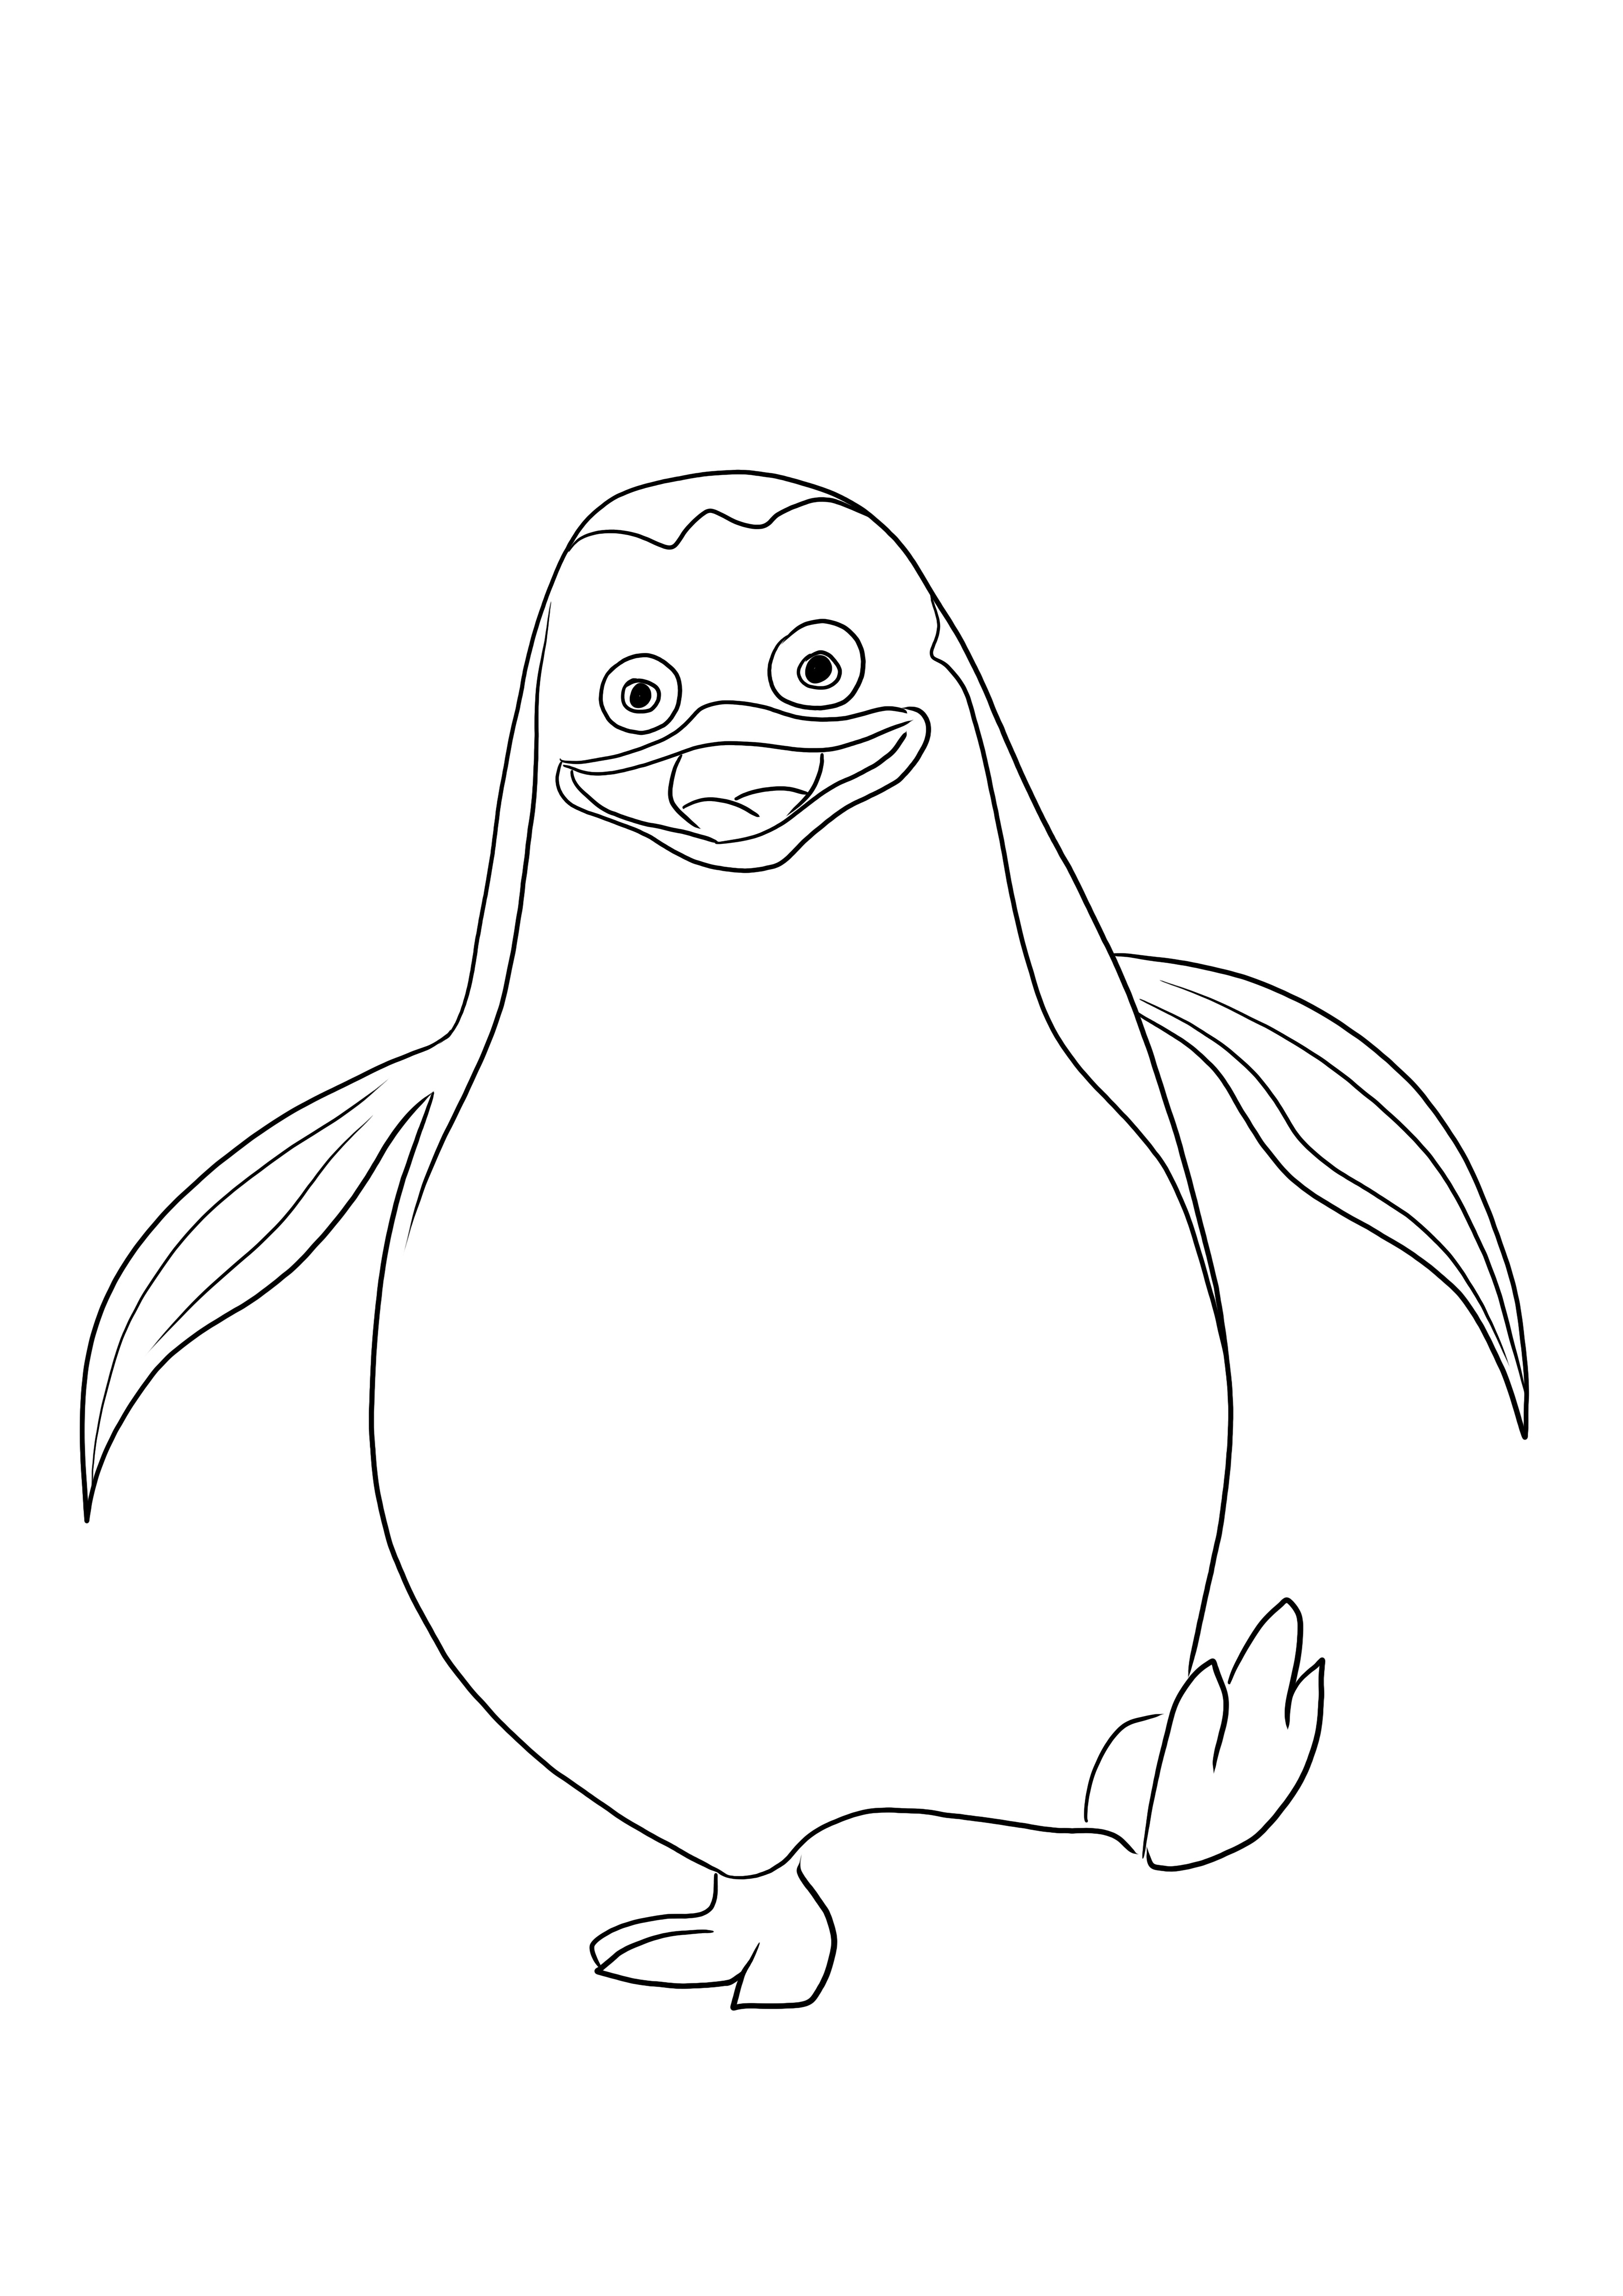 An easy-to-color image of Private the penguin ready to be printed and colored